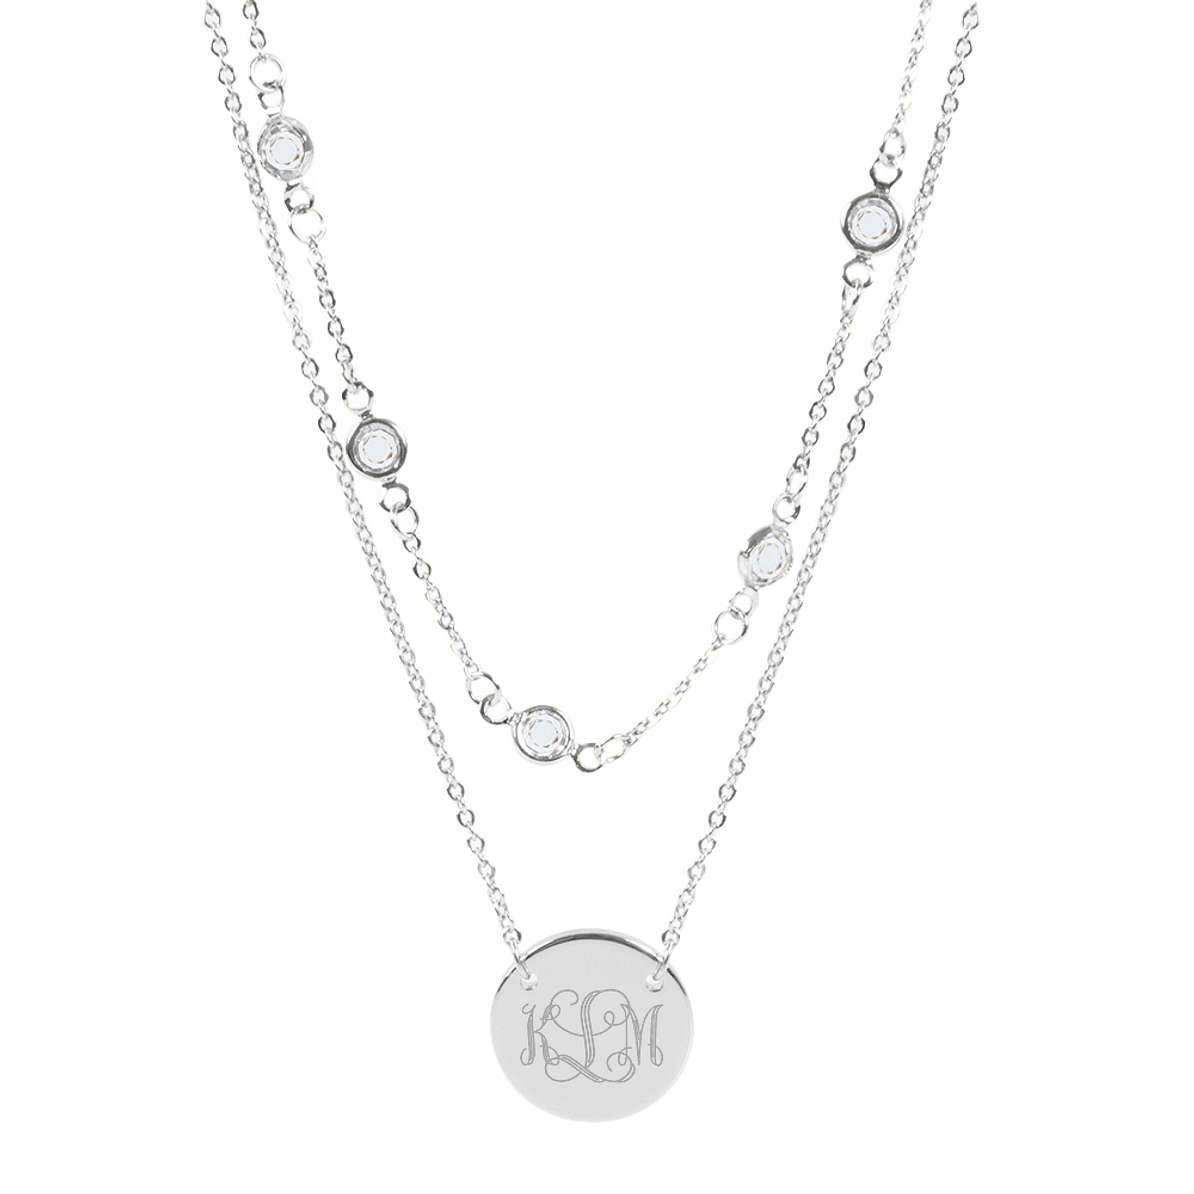 Personalized Dainty Layered Necklace